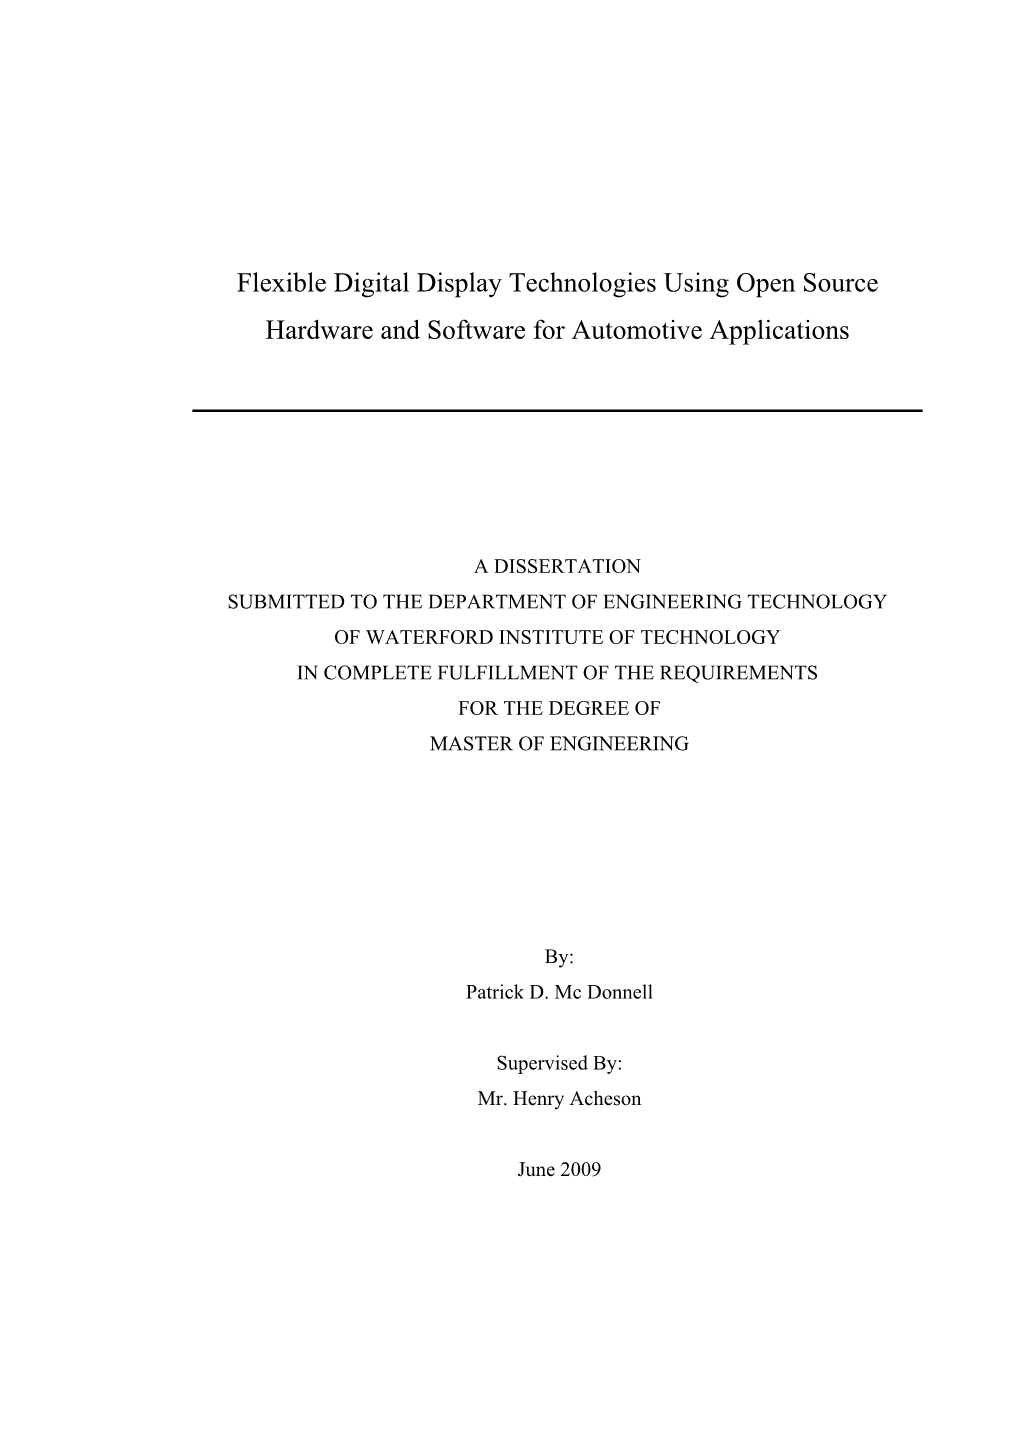 Flexible Digital Display Technologies Using Open Source Hardware and Software for Automotive Applications